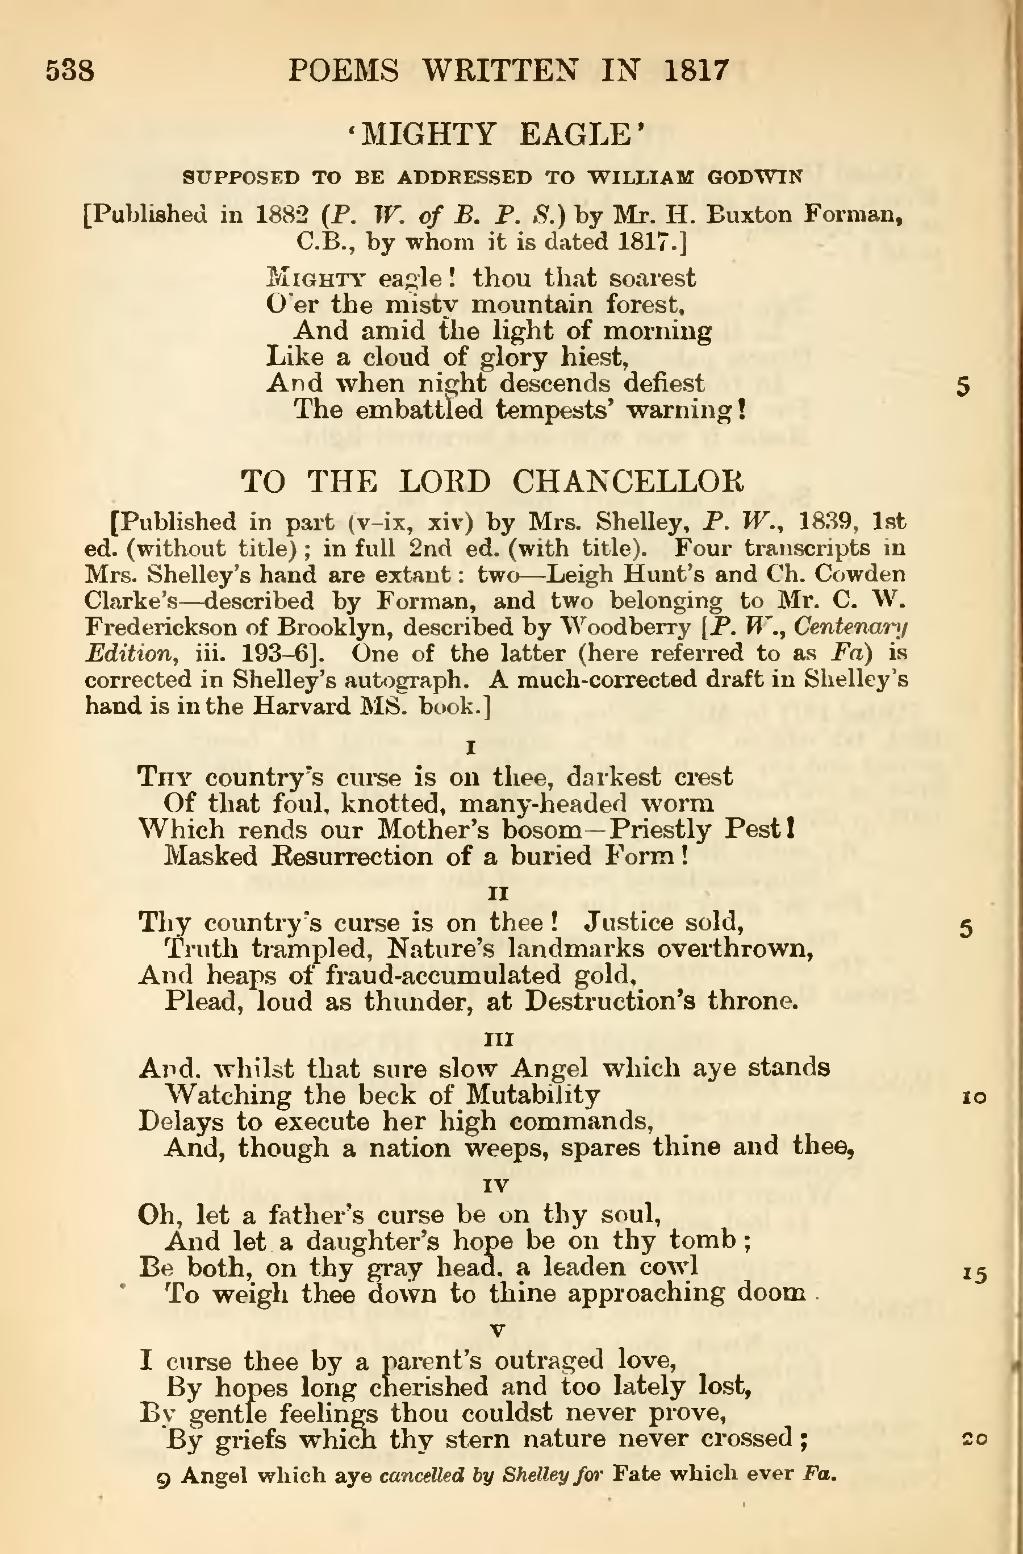 page568 1024px The plete poetical works of Percy Bysshe Shelley including materials never before printed in any edition of the poemsvu